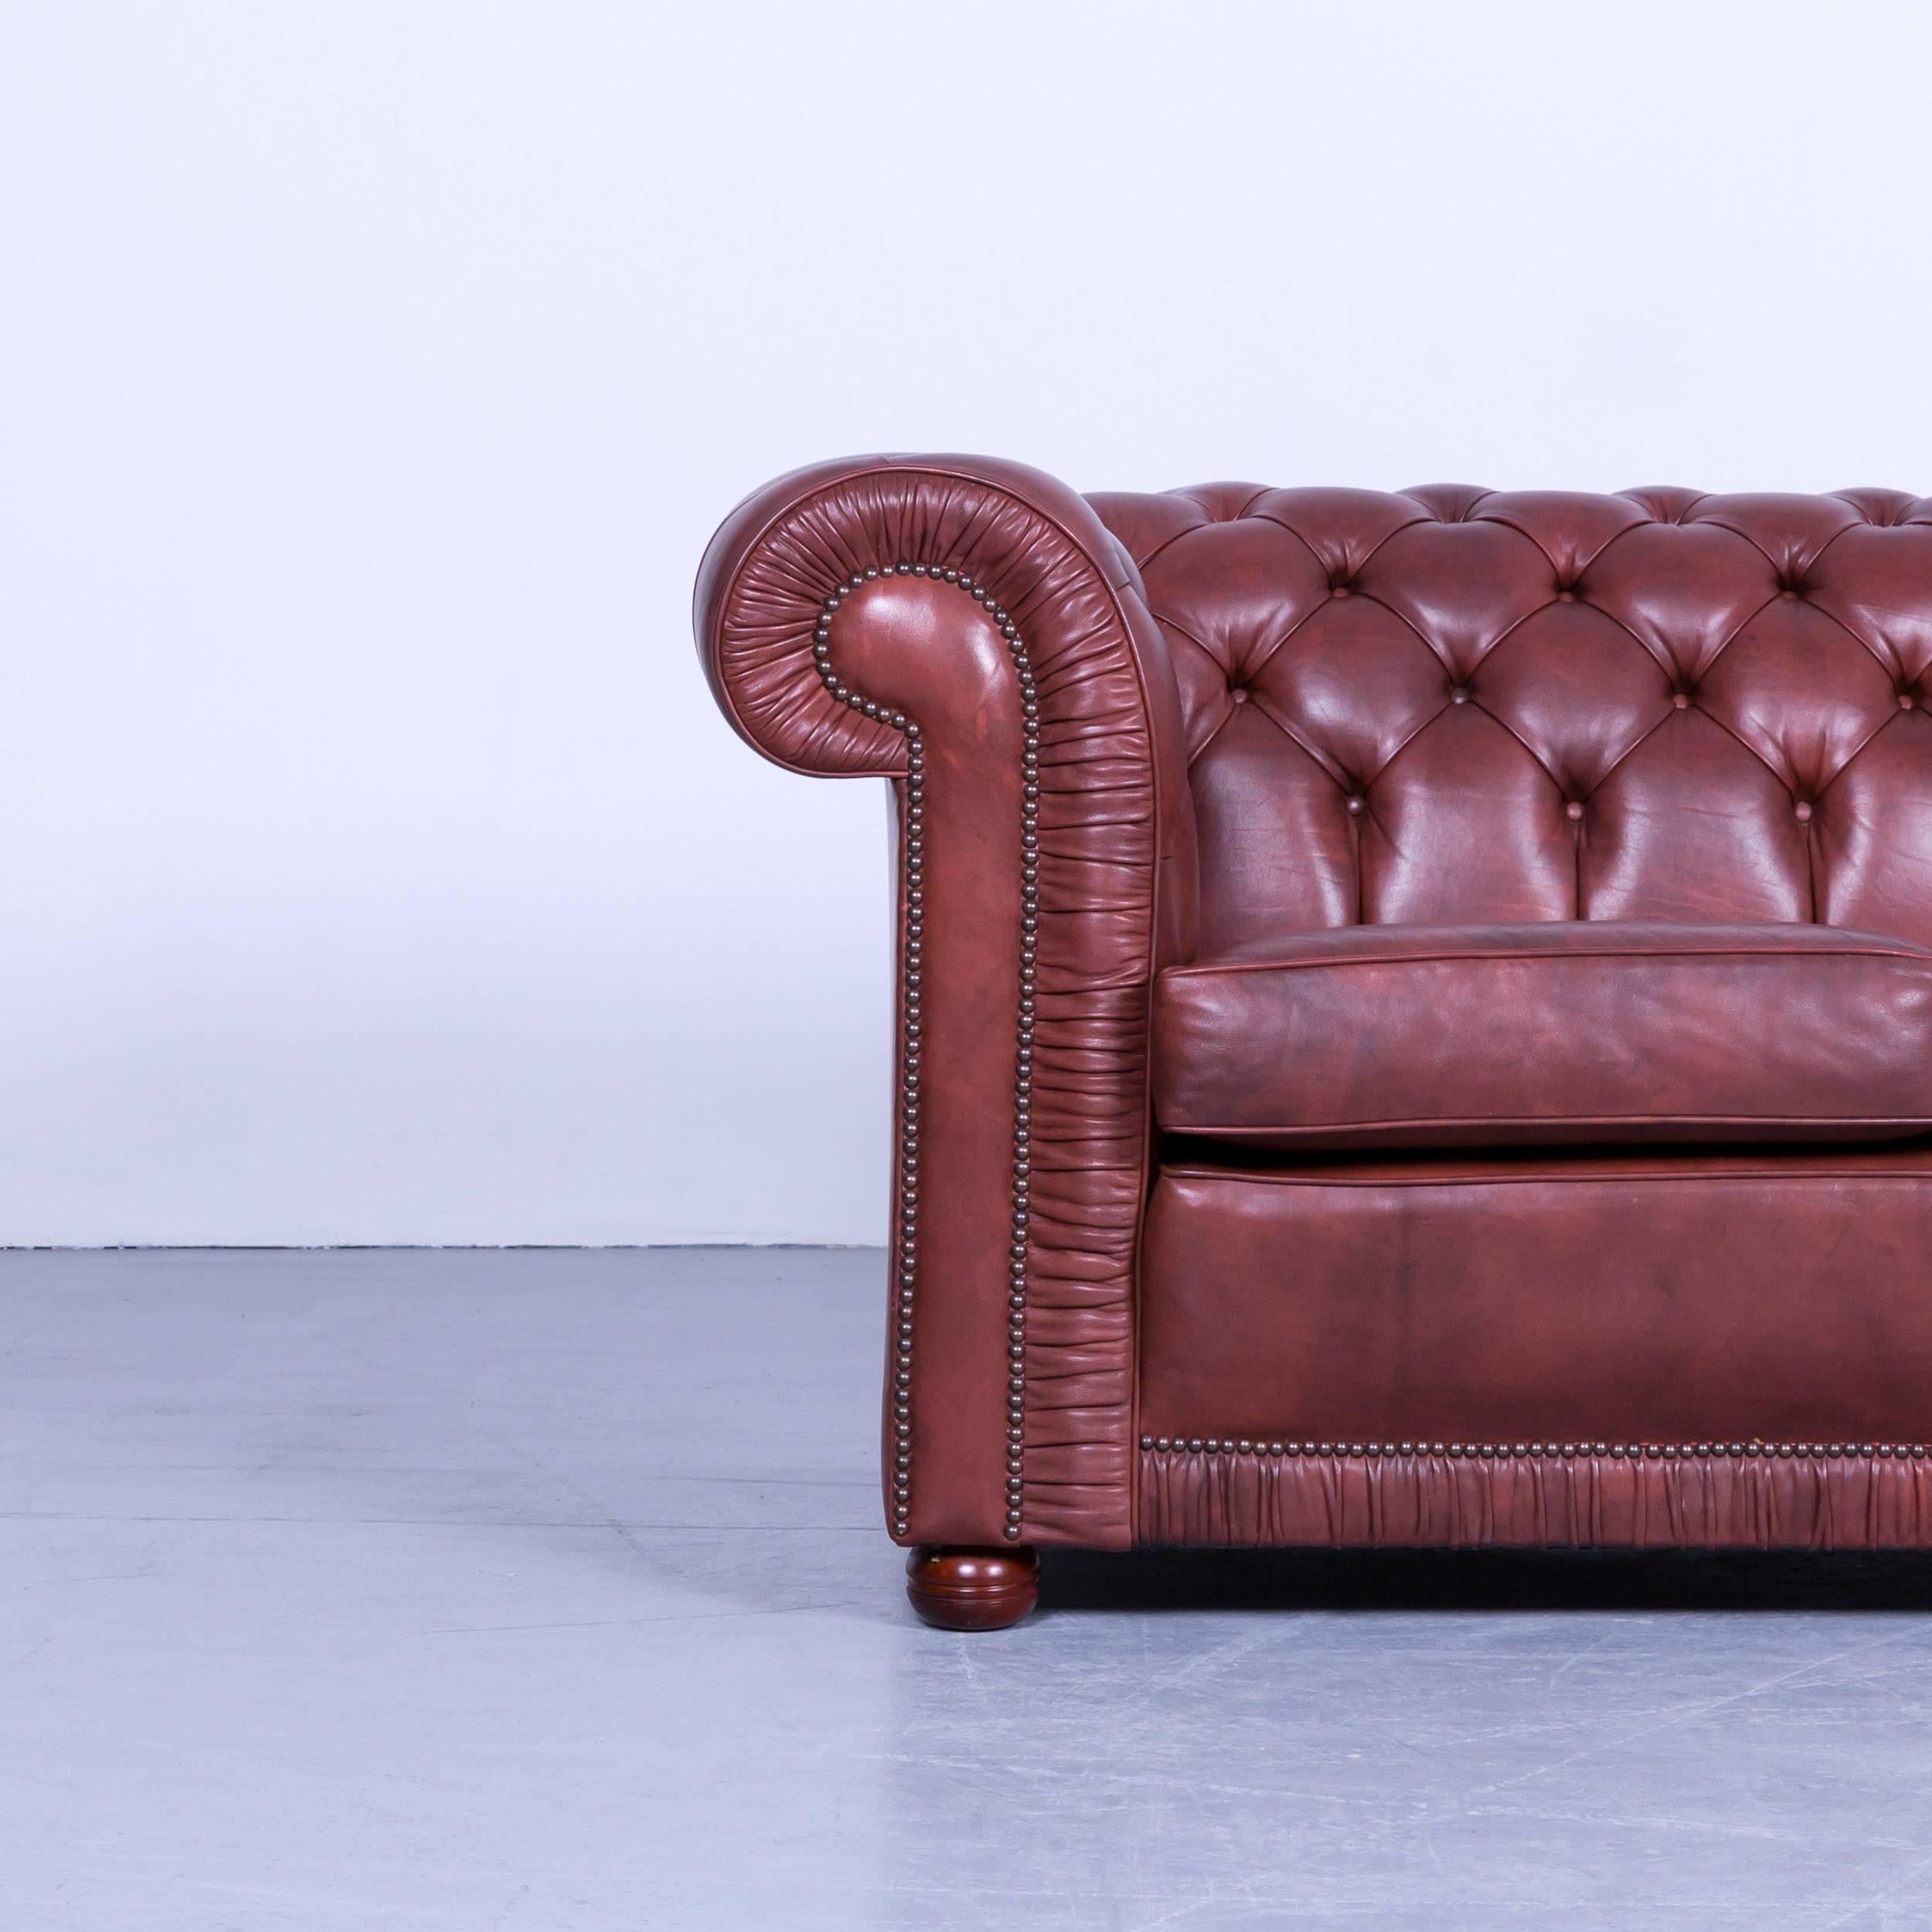 Chesterfield two-seat sofa red brown vintage retro handmade rivets.